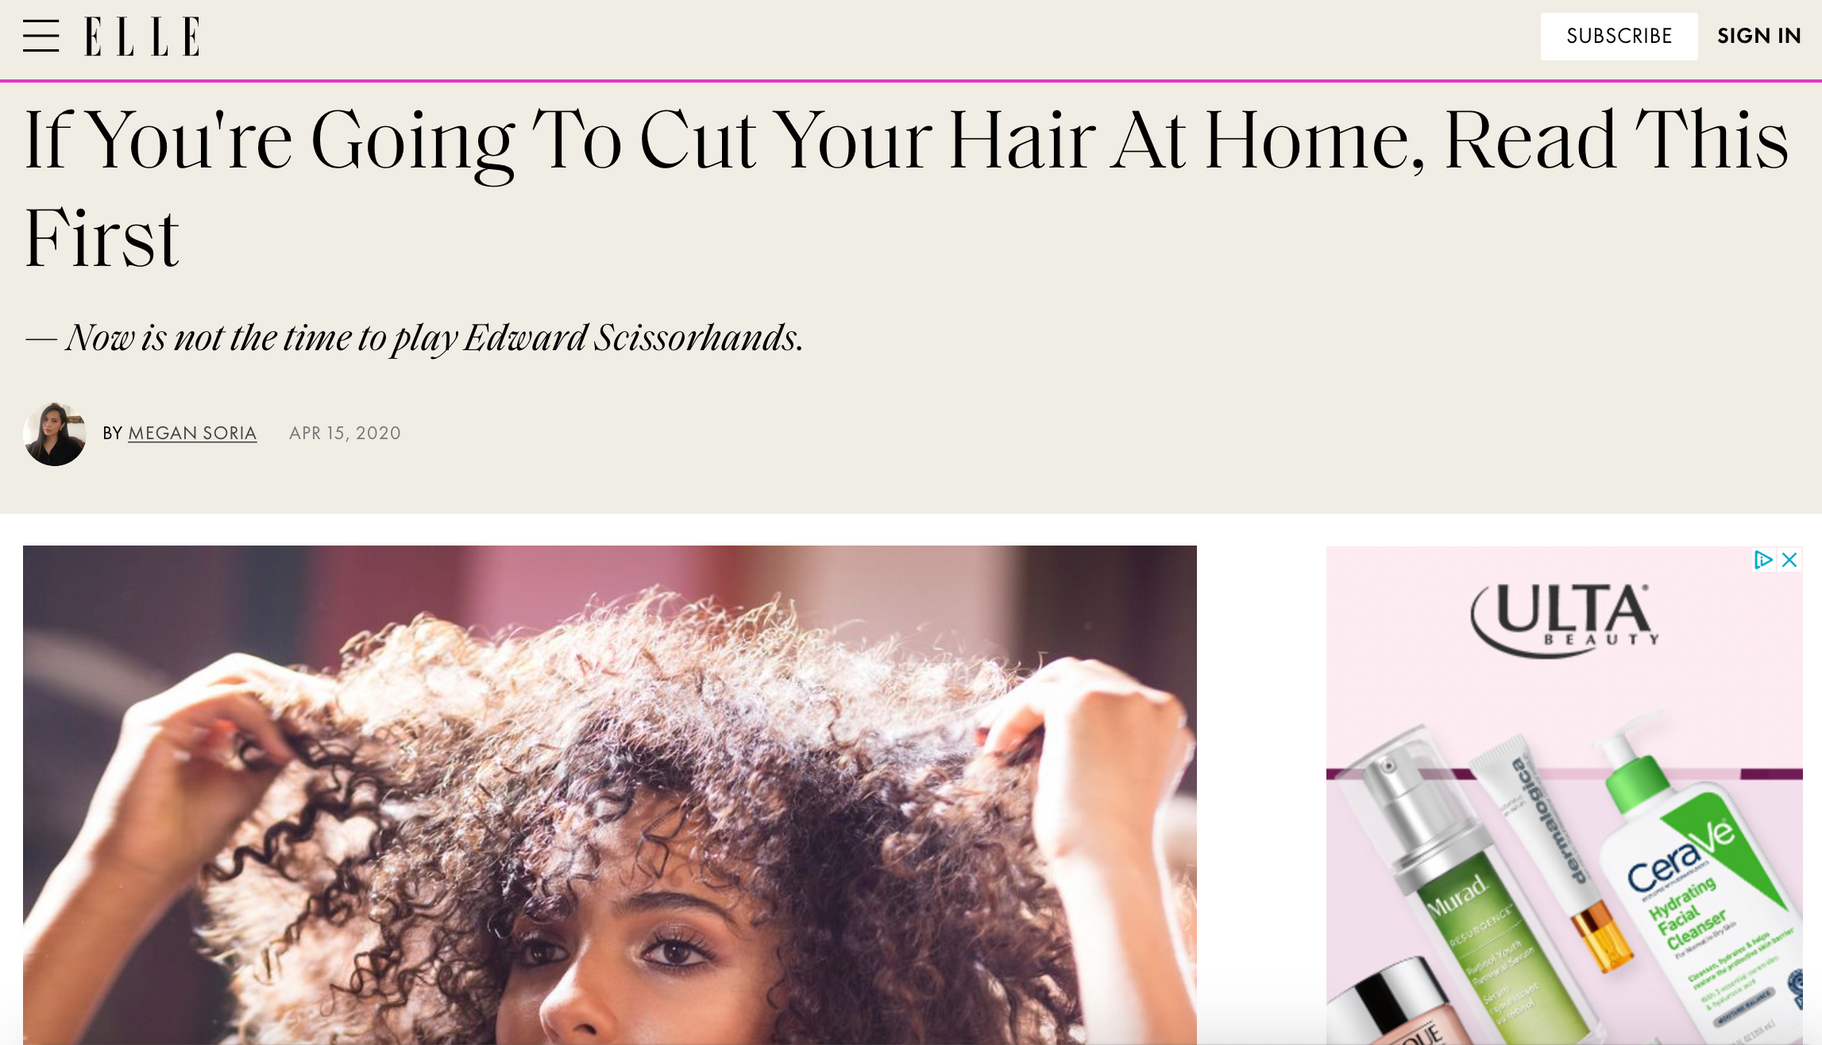 If You're Going To Cut Your Hair At Home, Read This First